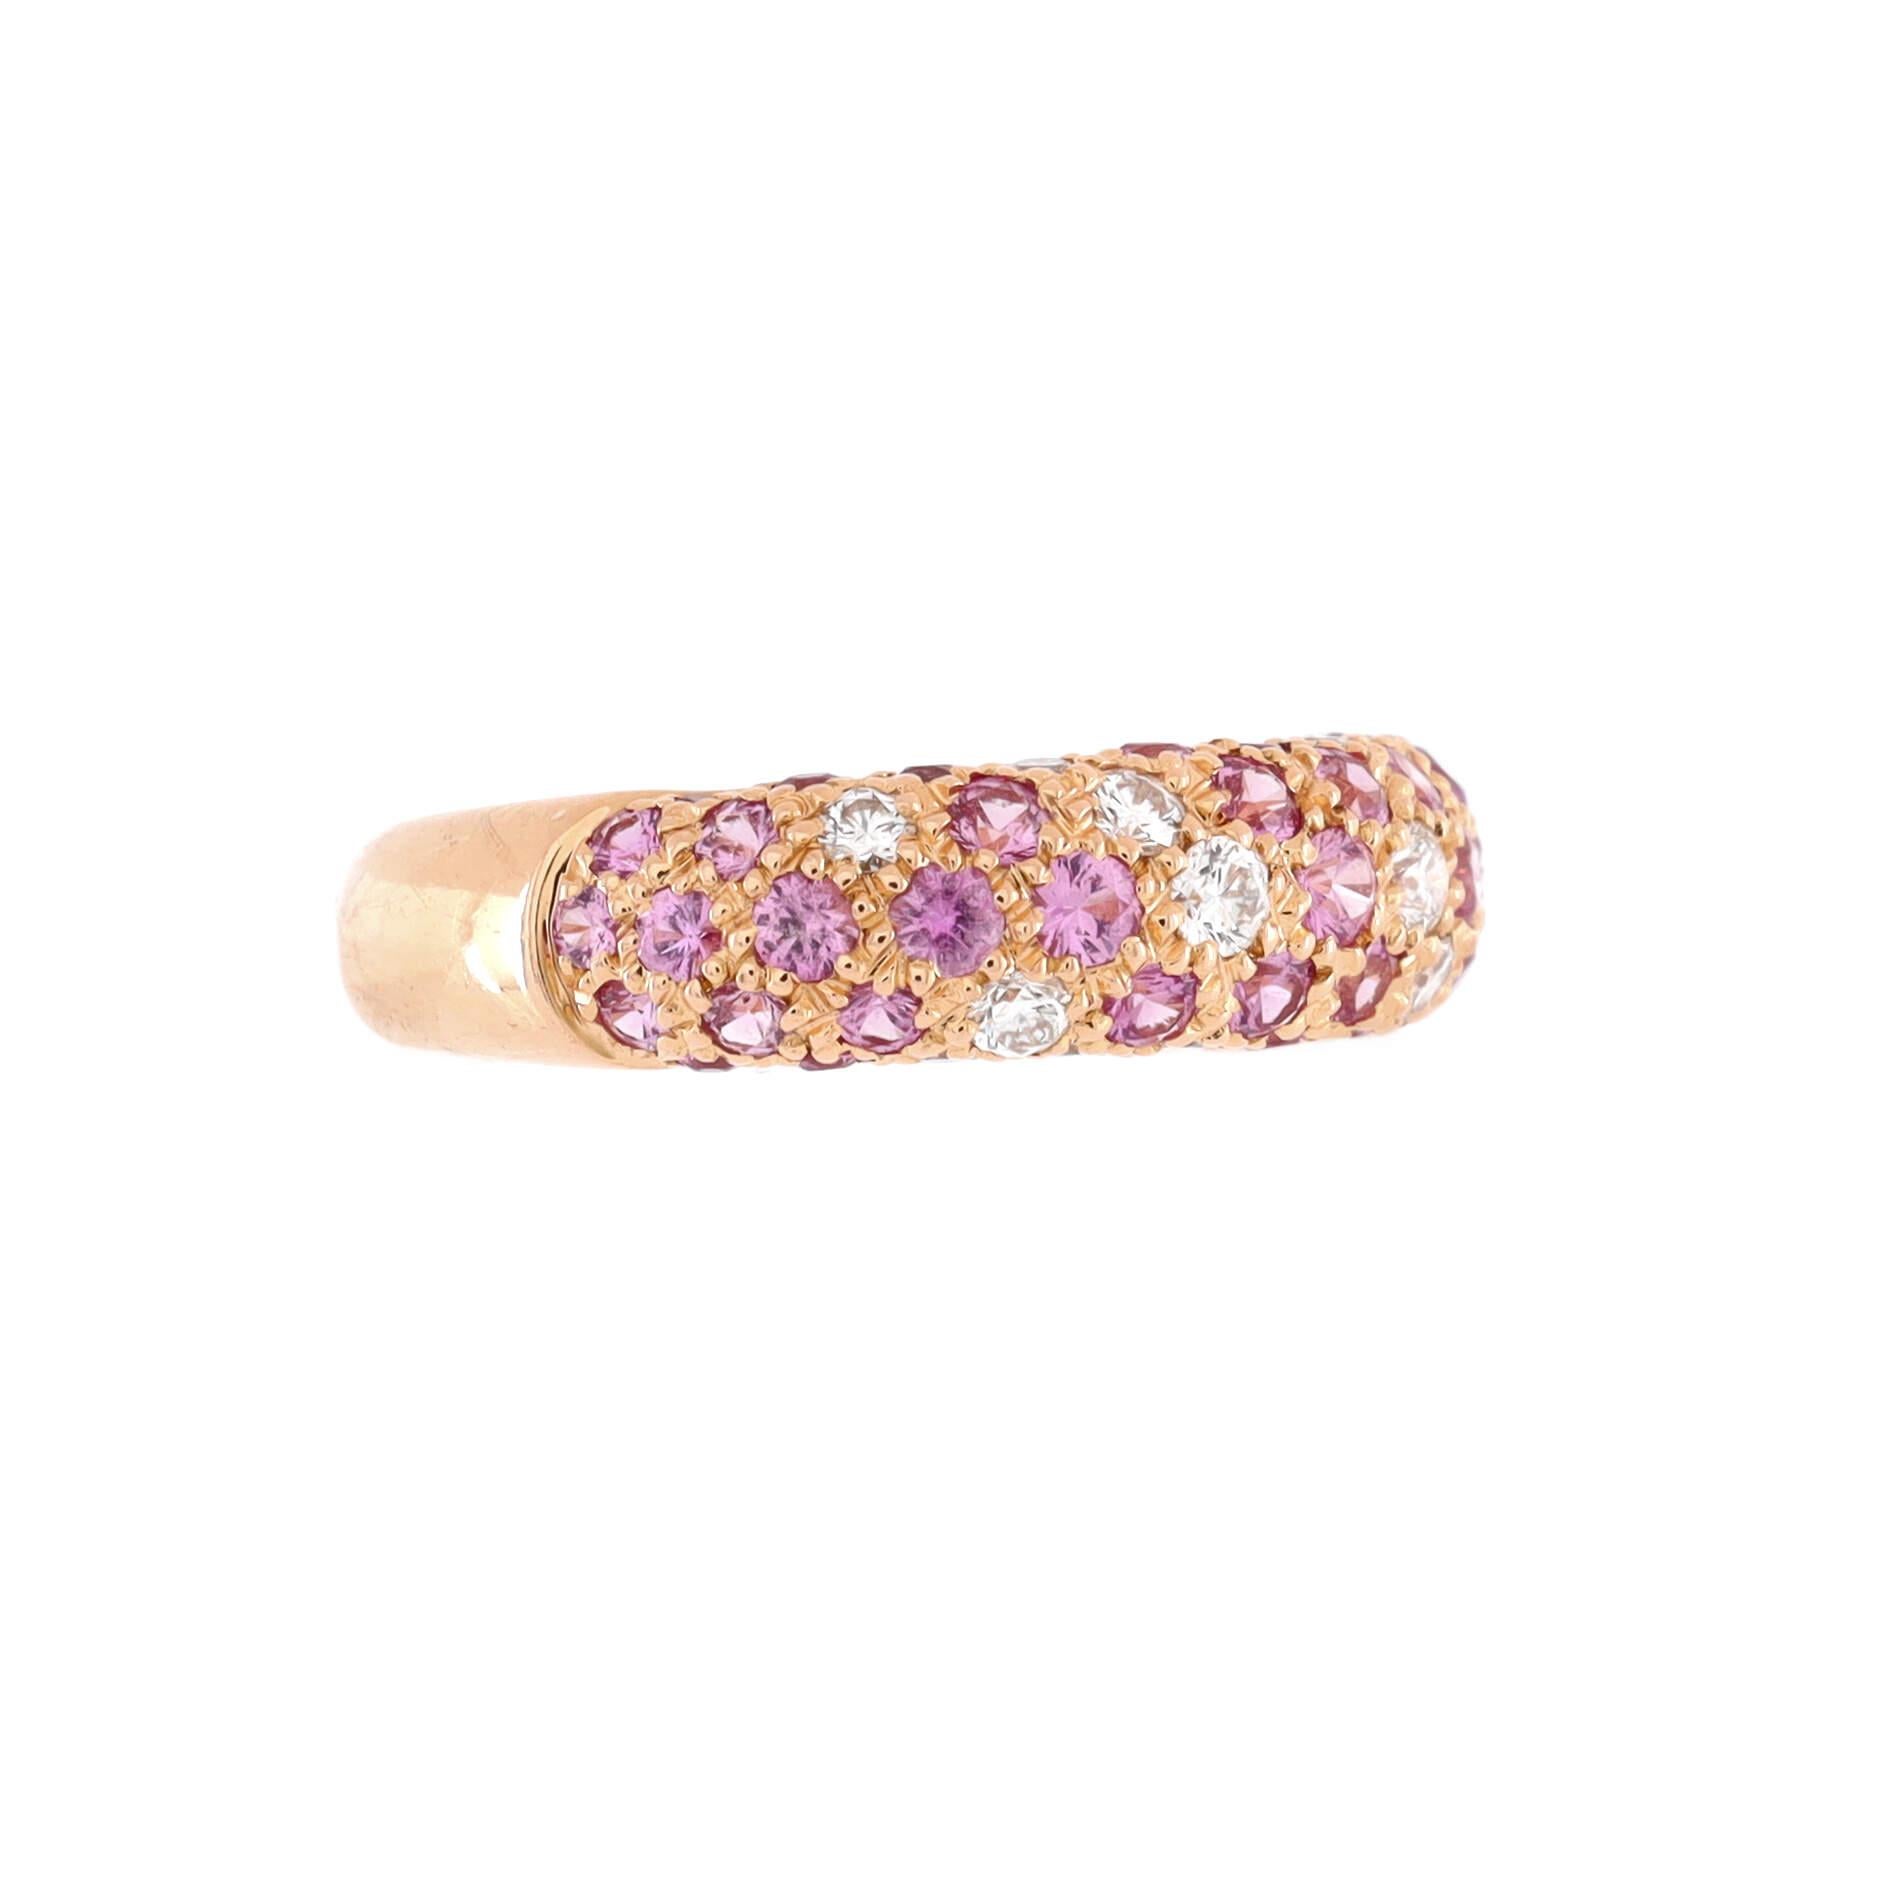 Condition: Good. Moderately heavy wear throughout including some abrasions to gemstones.
Accessories: No Accessories
Measurements: Size: 4.75 - 49, Width: 3.95 mm
Designer: Cartier
Model: Etincelle de Cartier Ring 18K Rose Gold with Pink Sapphires